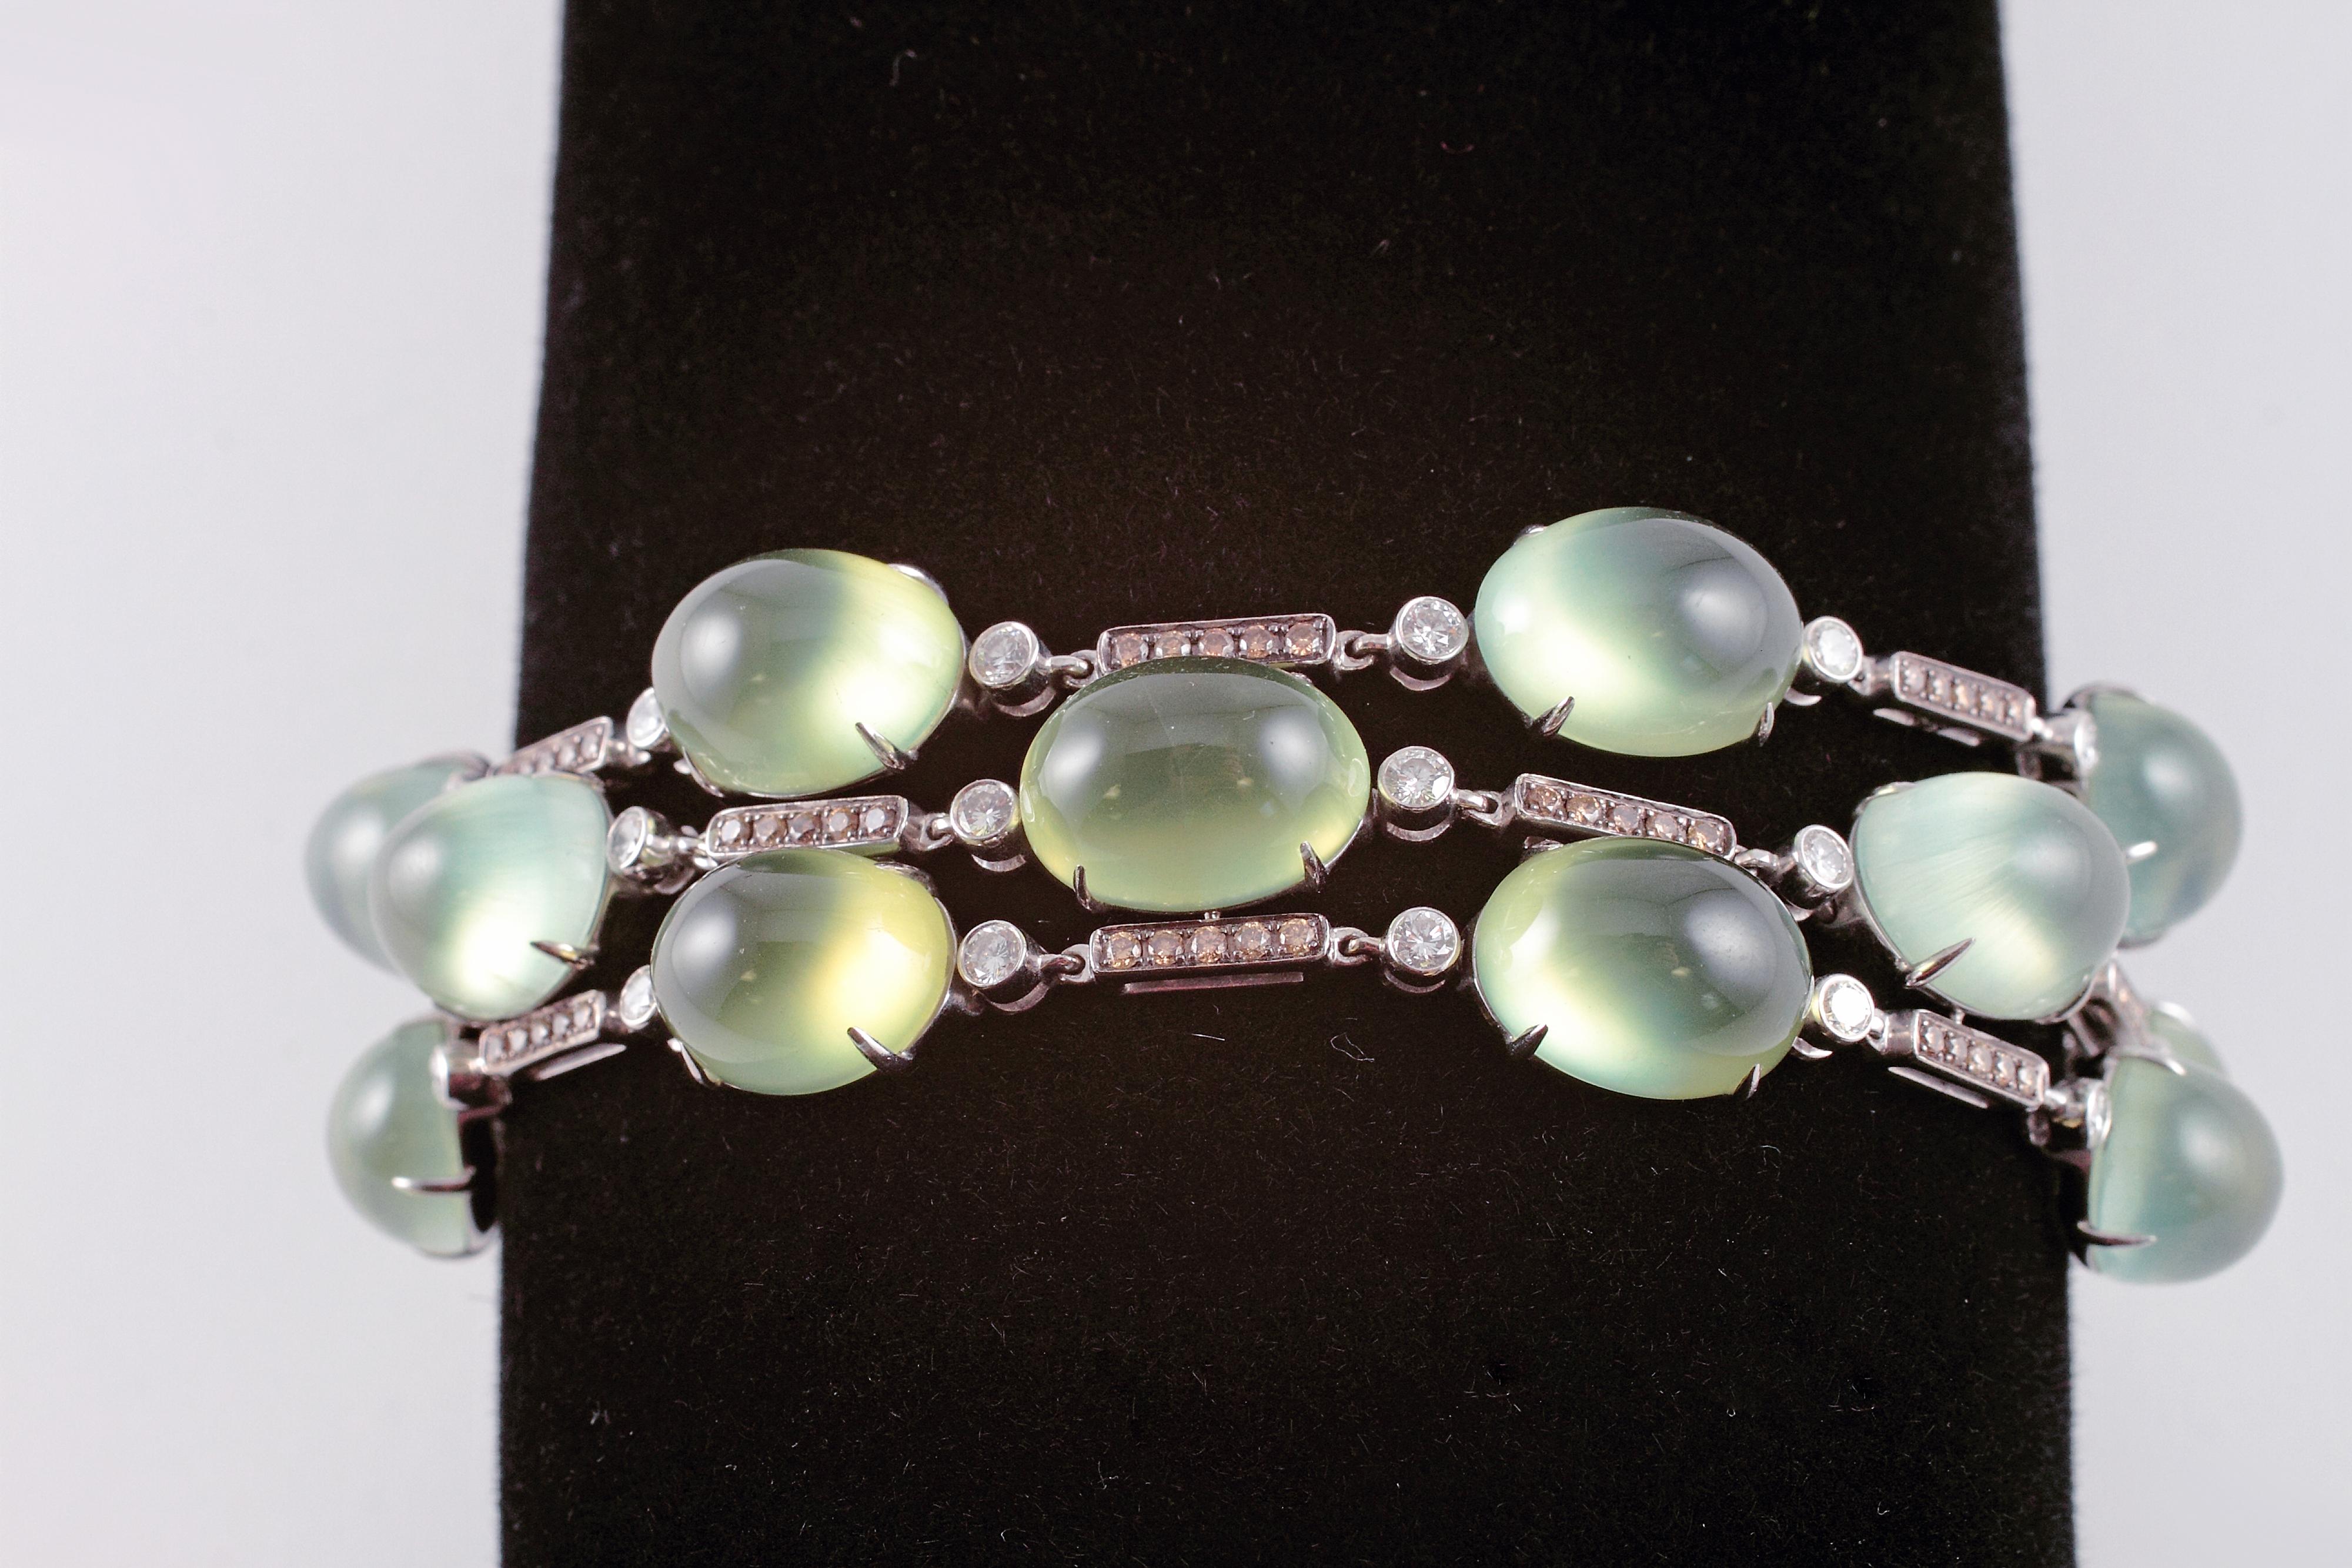 Purchased from renowned London jewelry designer David Morris, this bracelet is as unusual as it is beautiful! In 18 karat white gold, the thirteen cabochon-cut Prehnite stones alternate with bars of brown diamonds and bezel-set, colorless diamonds. 